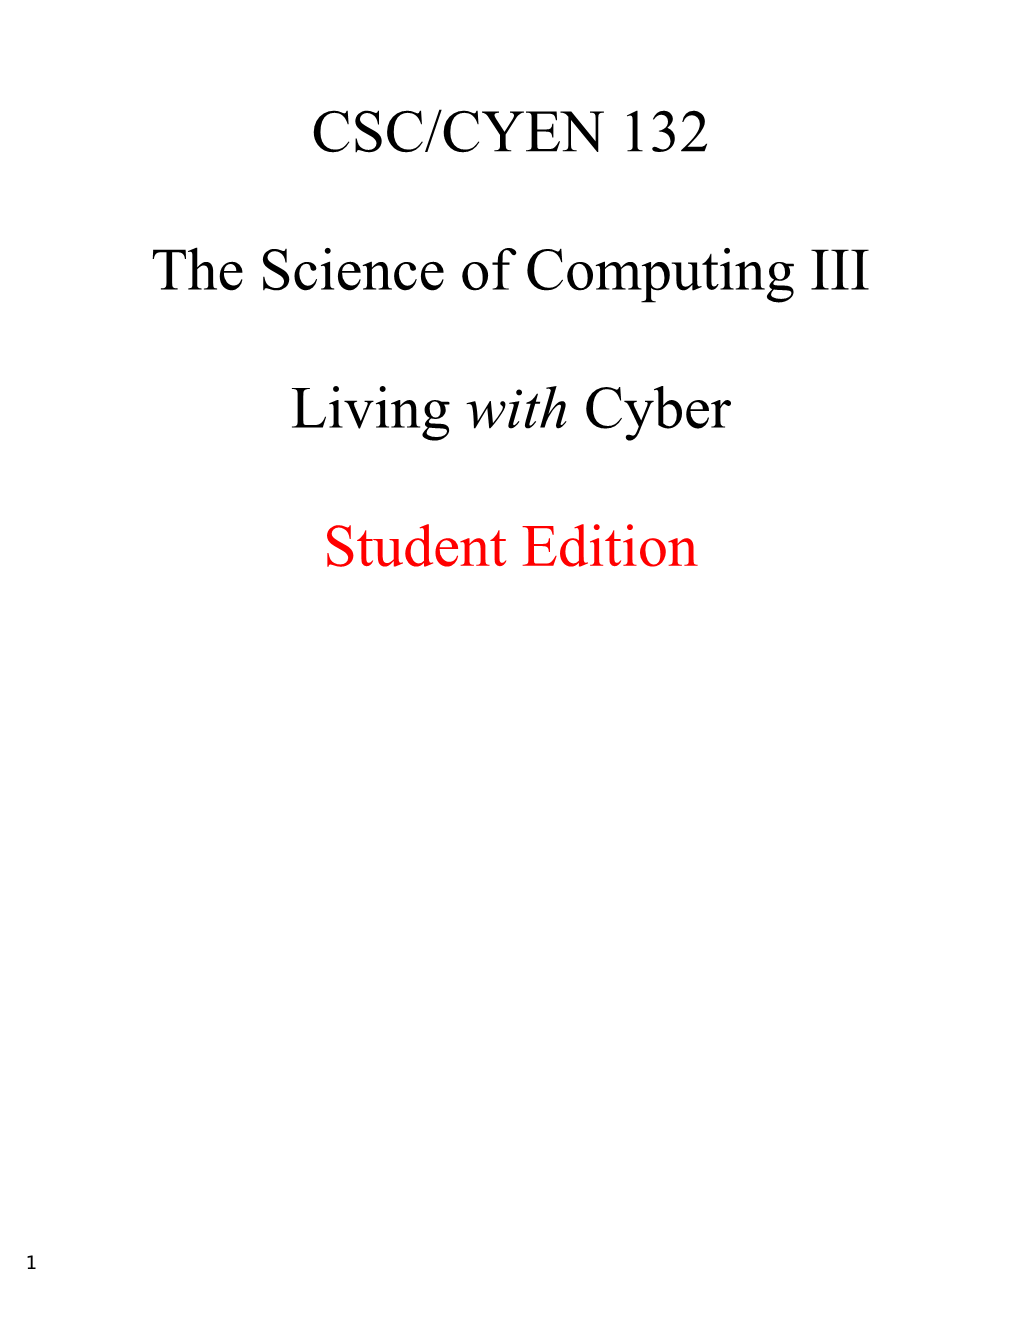 CSC/CYEN 132 the Science of Computing III Living with Cyber